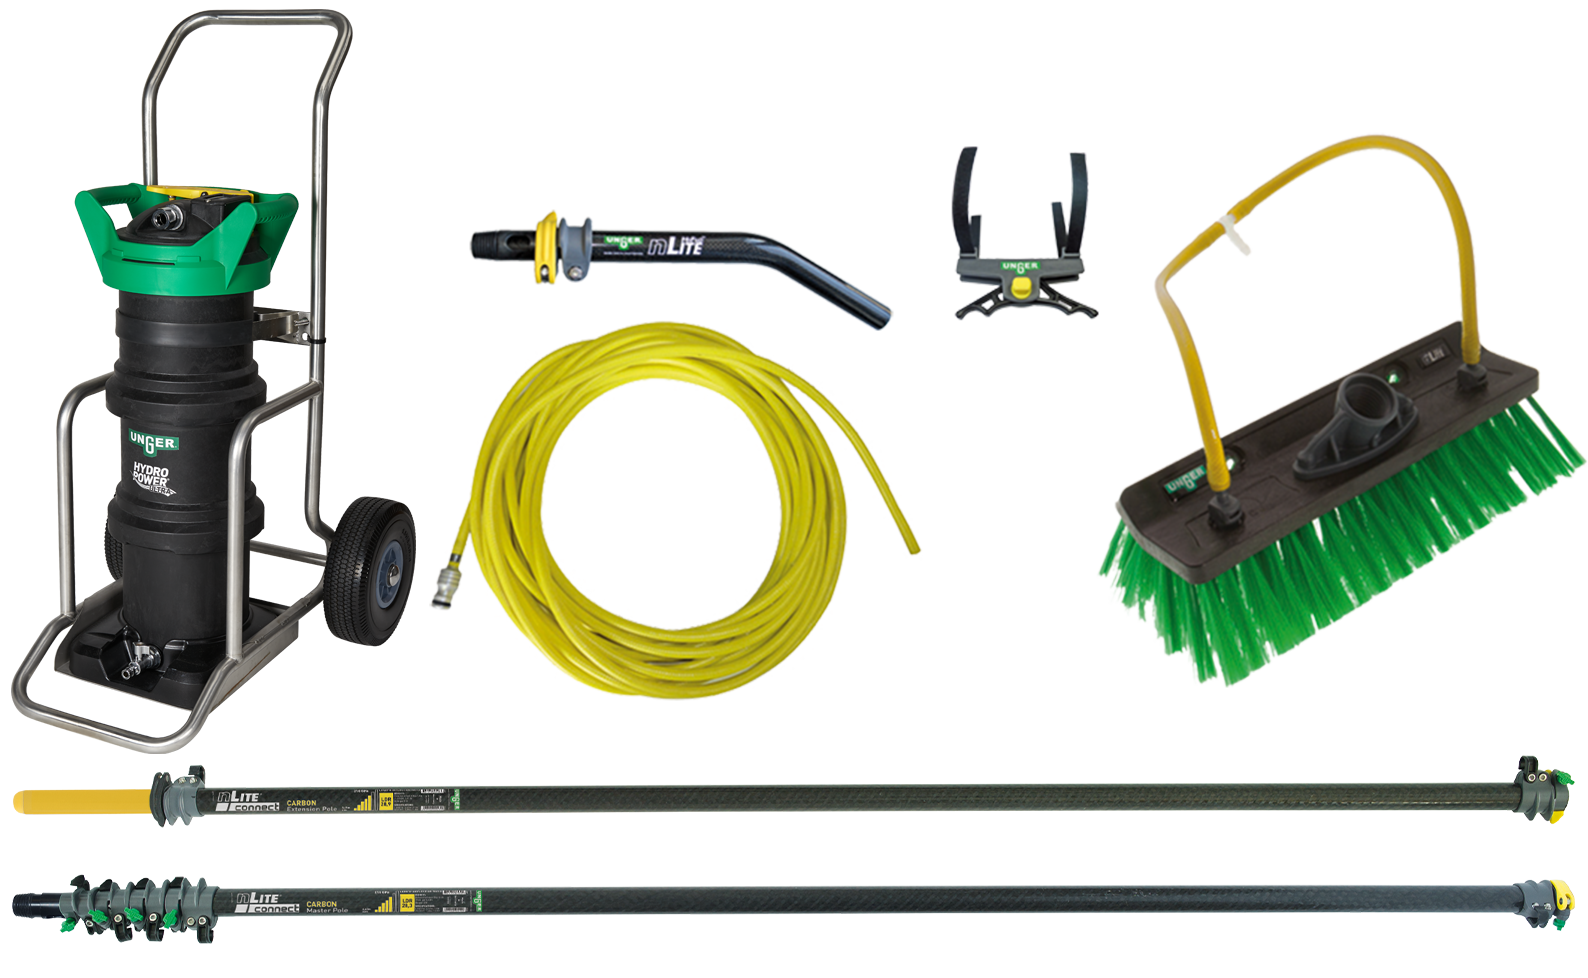 Kit Master HydroPower Ultra LC + nLite CONNECT CARBONE - UNGER - 10m